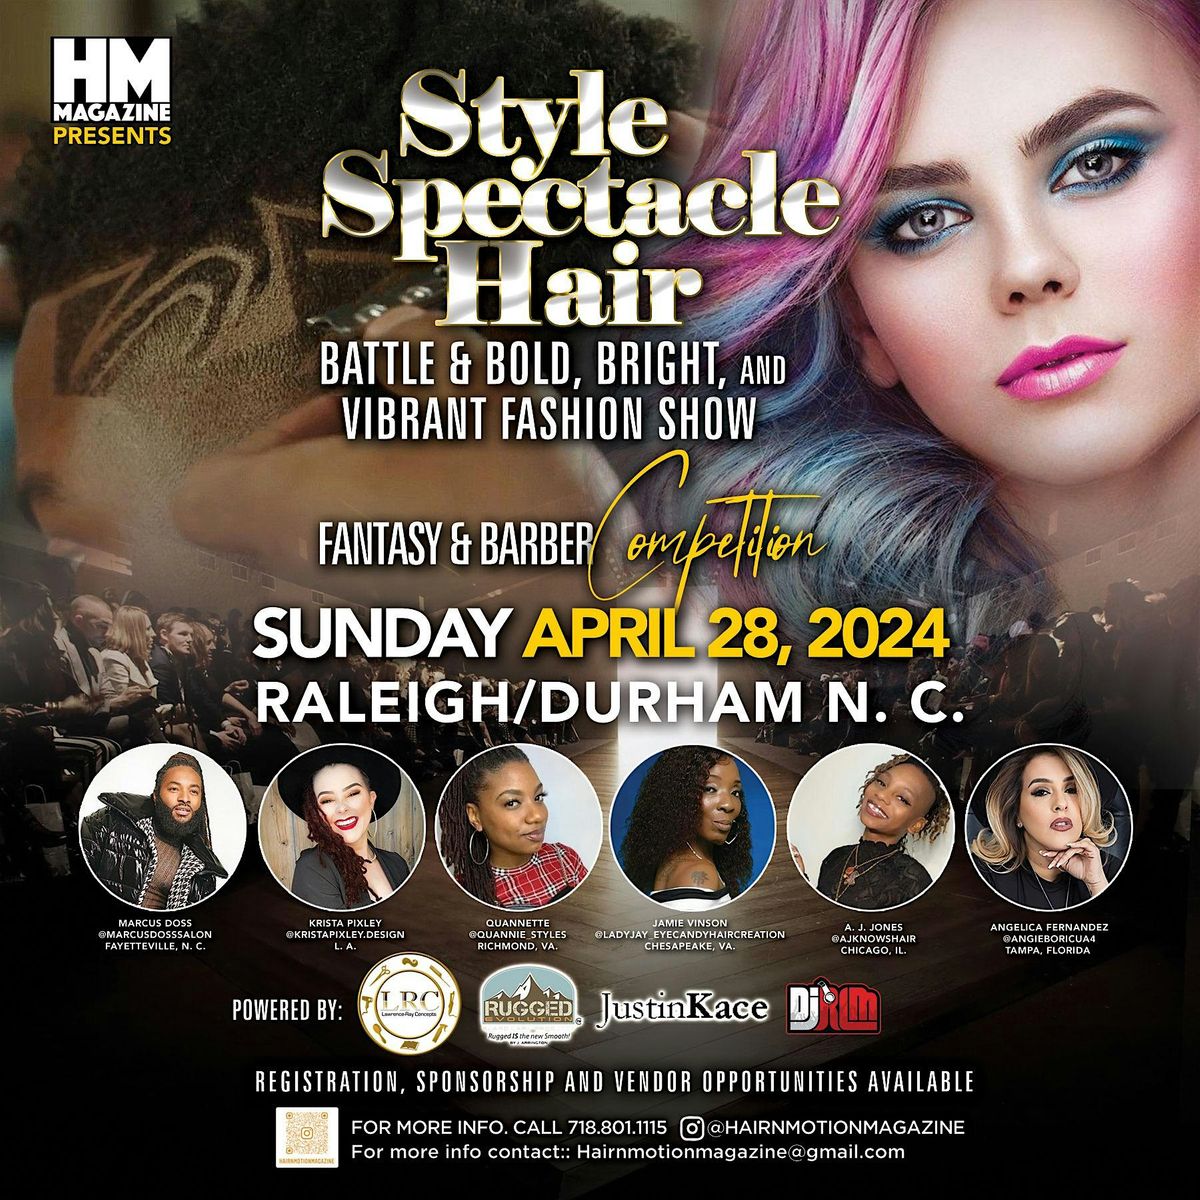 HM Magazine presents Fantasy Hair Barber Competitions & Fashion Show